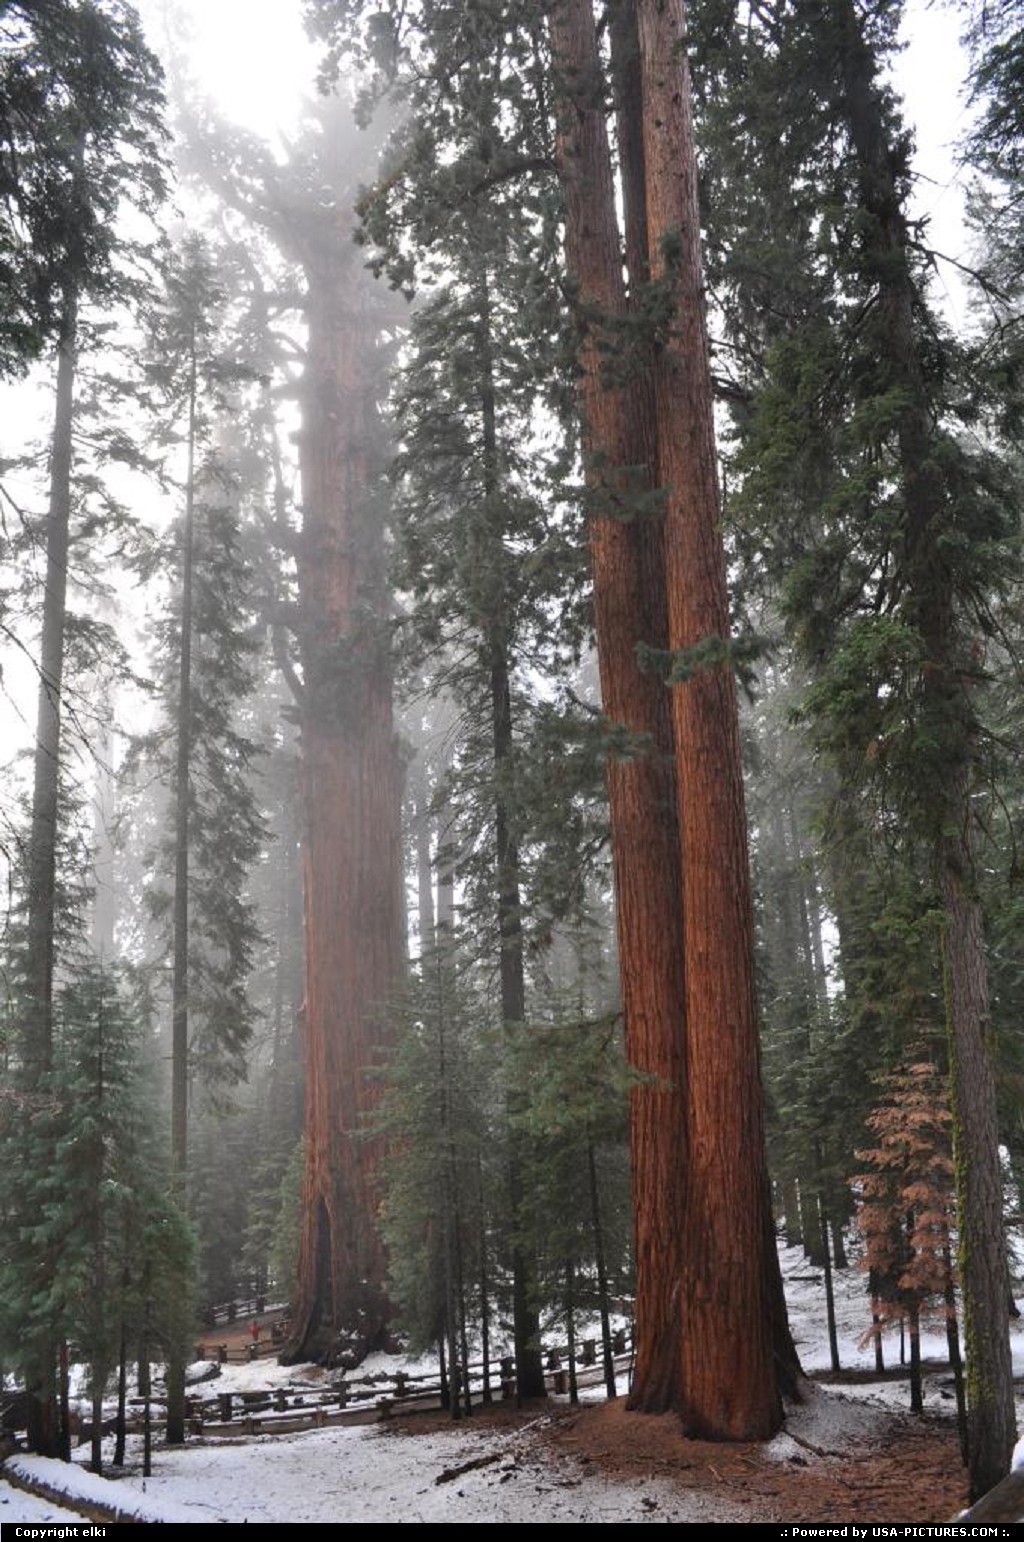 Picture by elki:  California Sequoia  sequoia national park